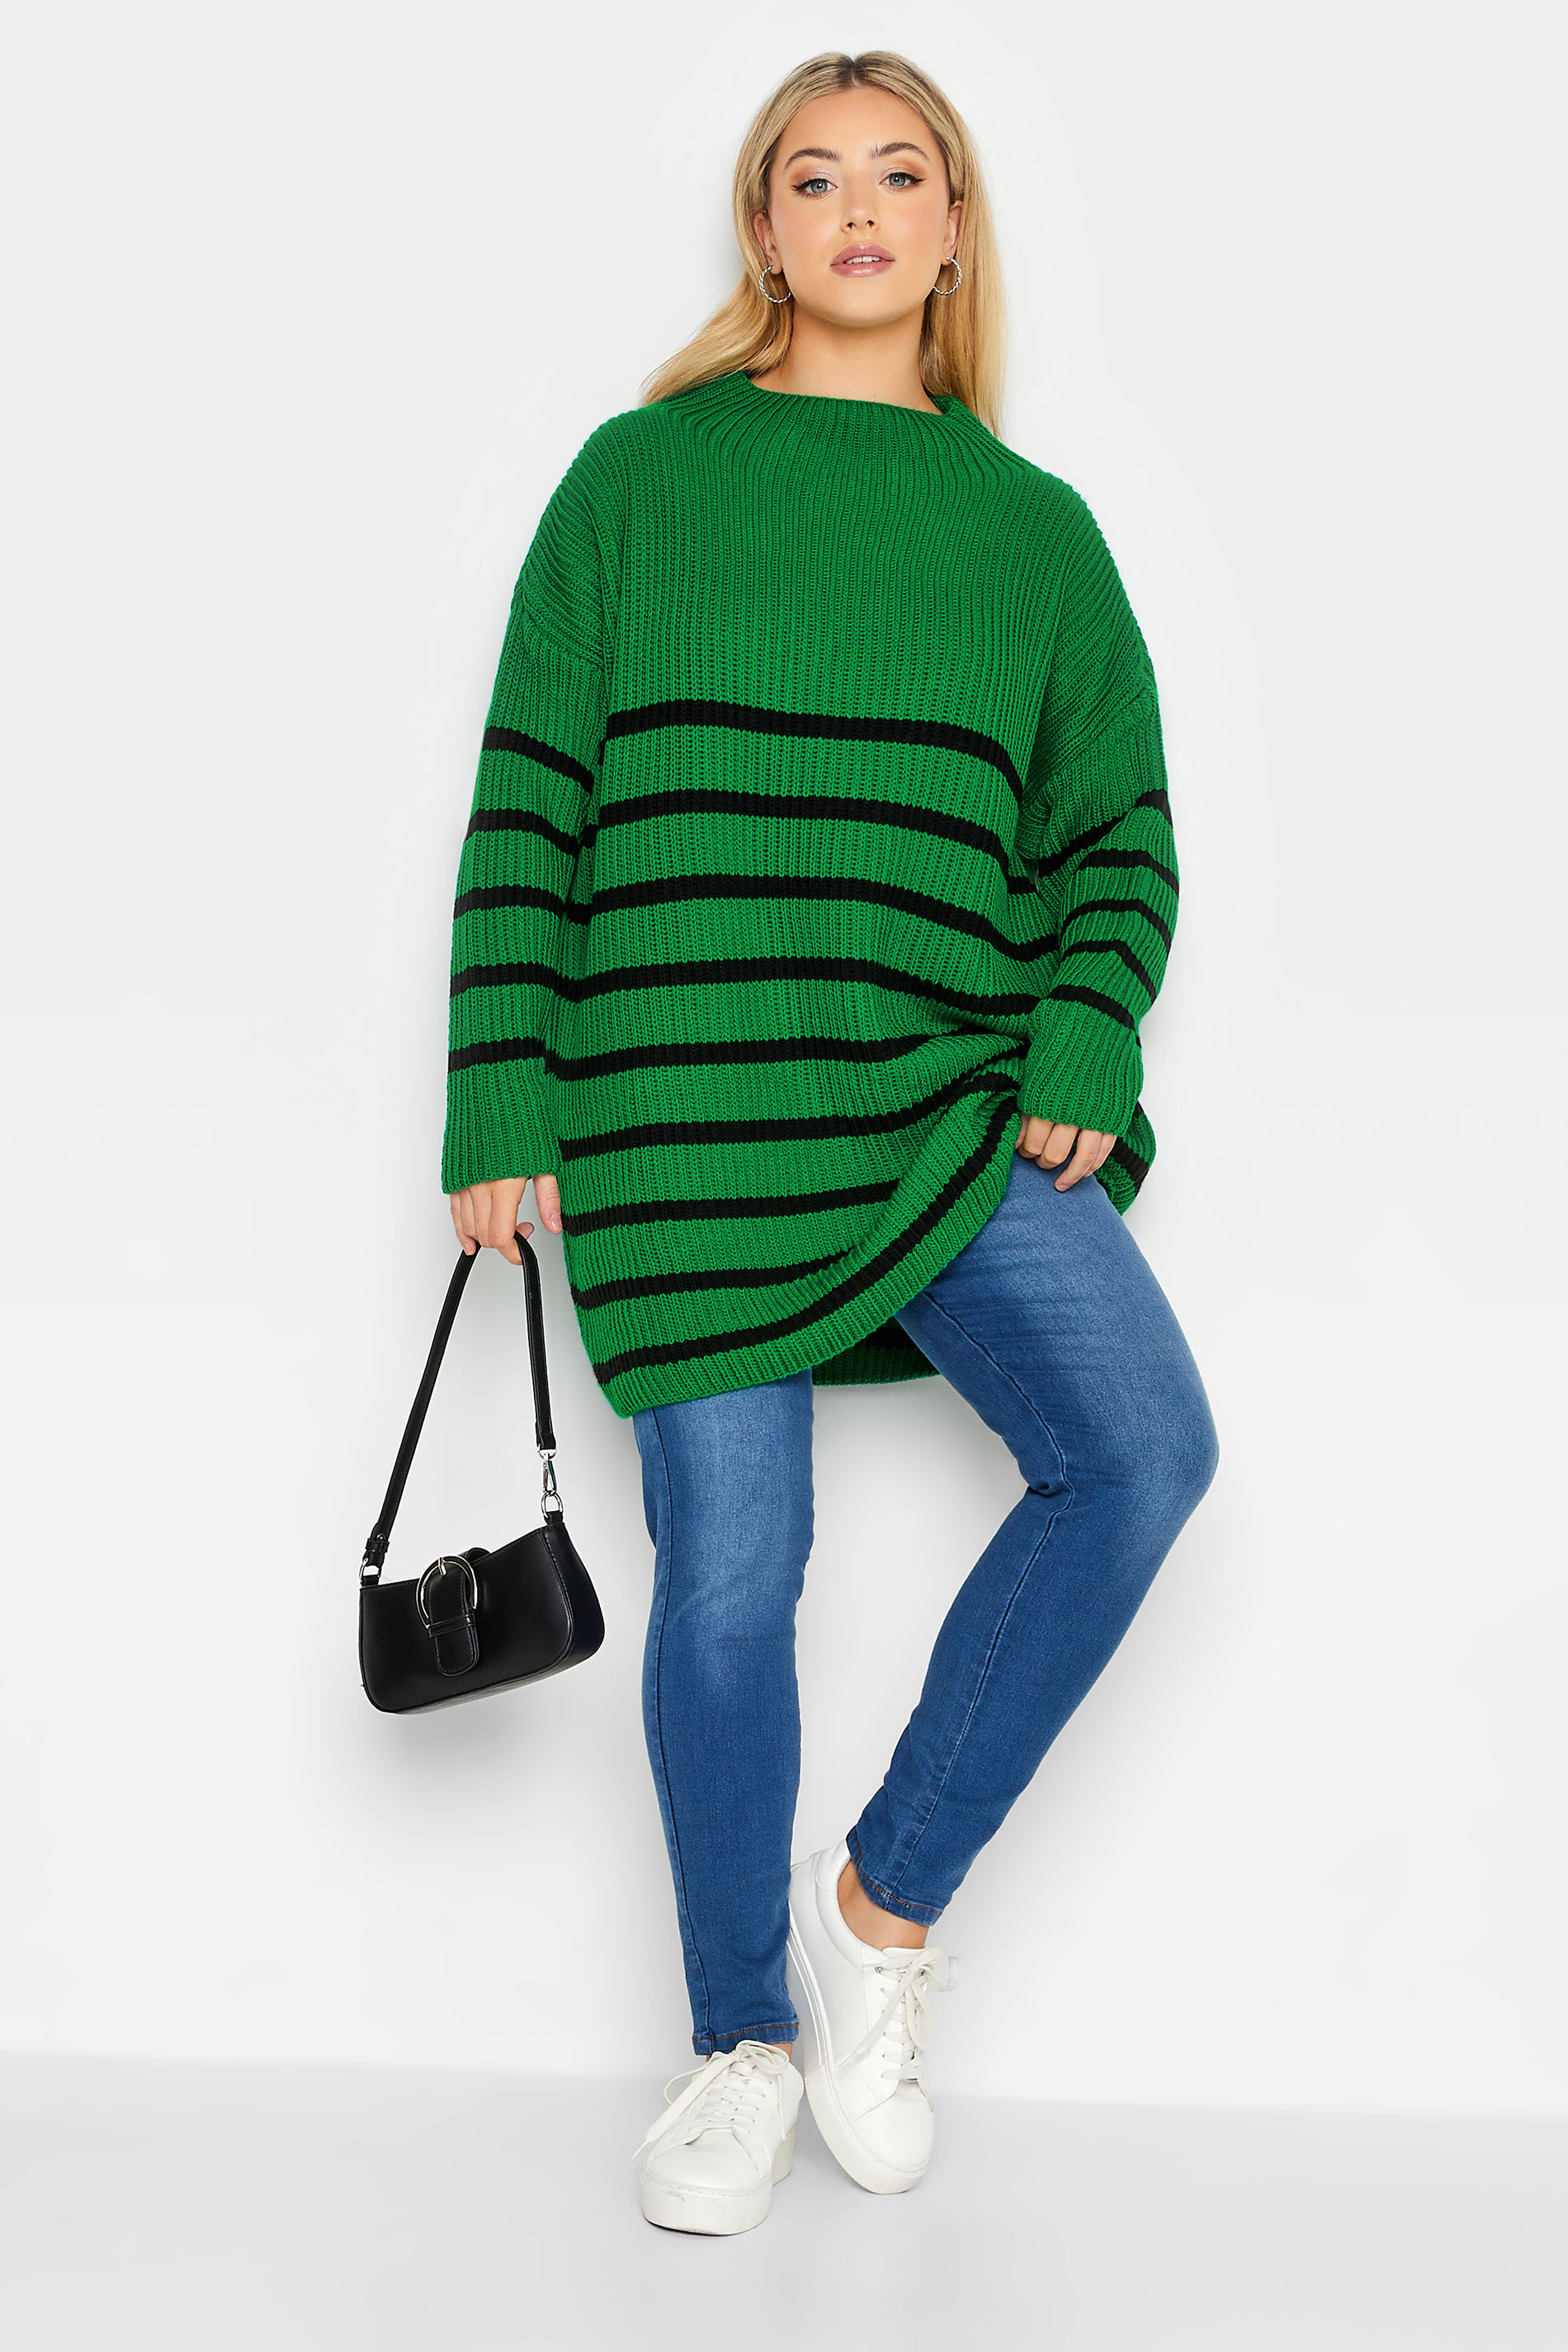 YOURS LUXURY Plus Size Green Stripe High Neck Jumper | Yours Clothing 2